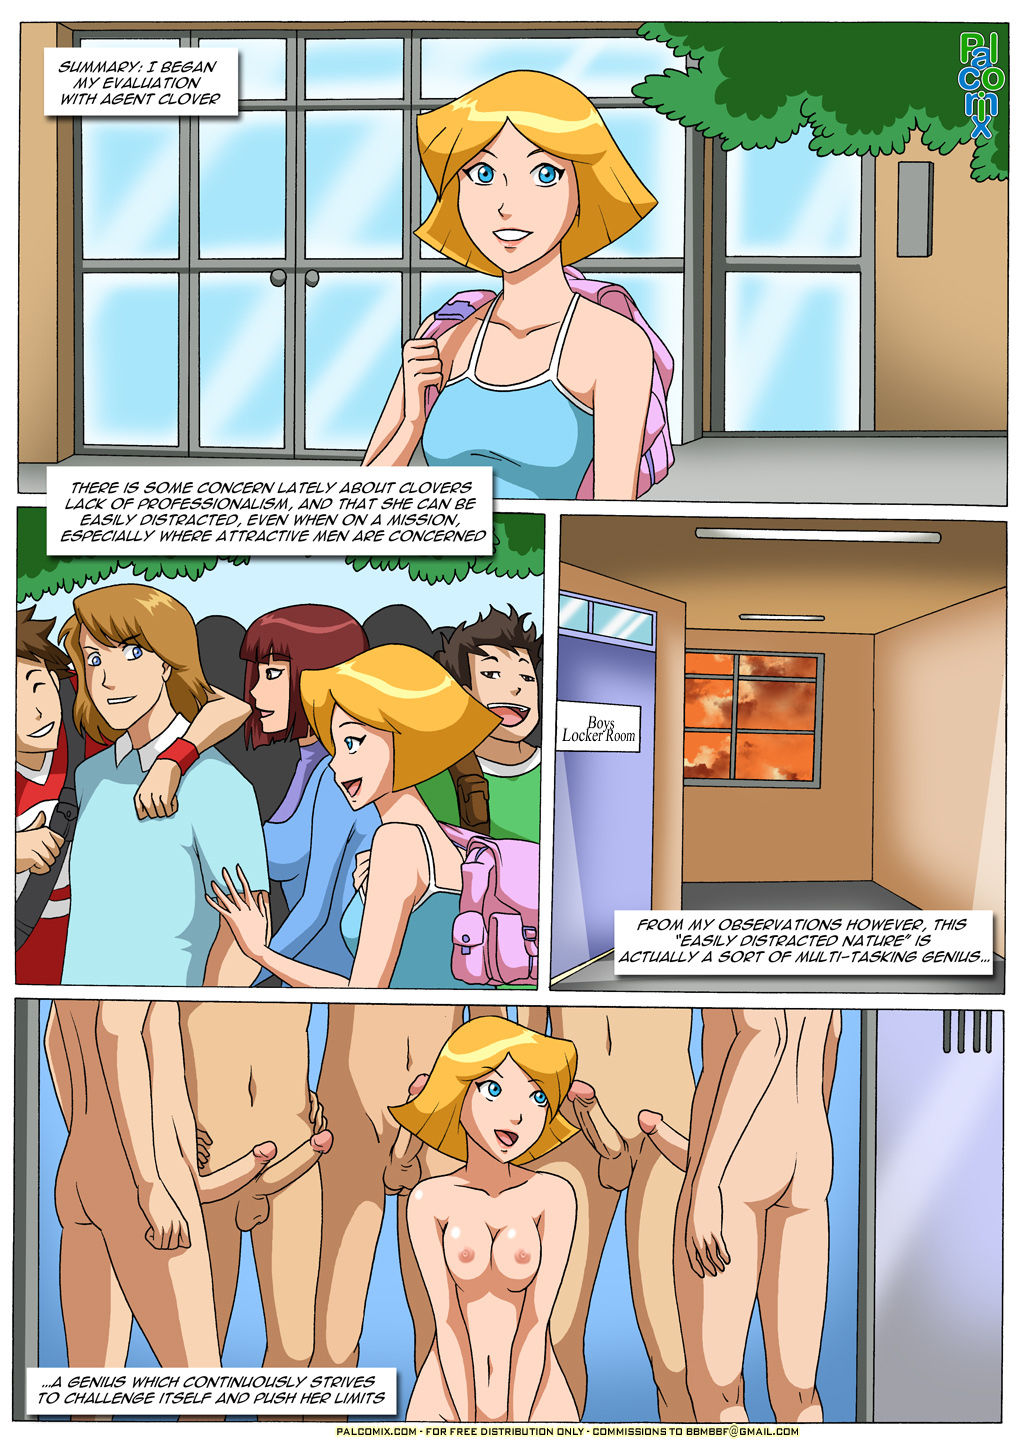 [Palcomix] Deep Cover Evaluation (Totally Spies) 